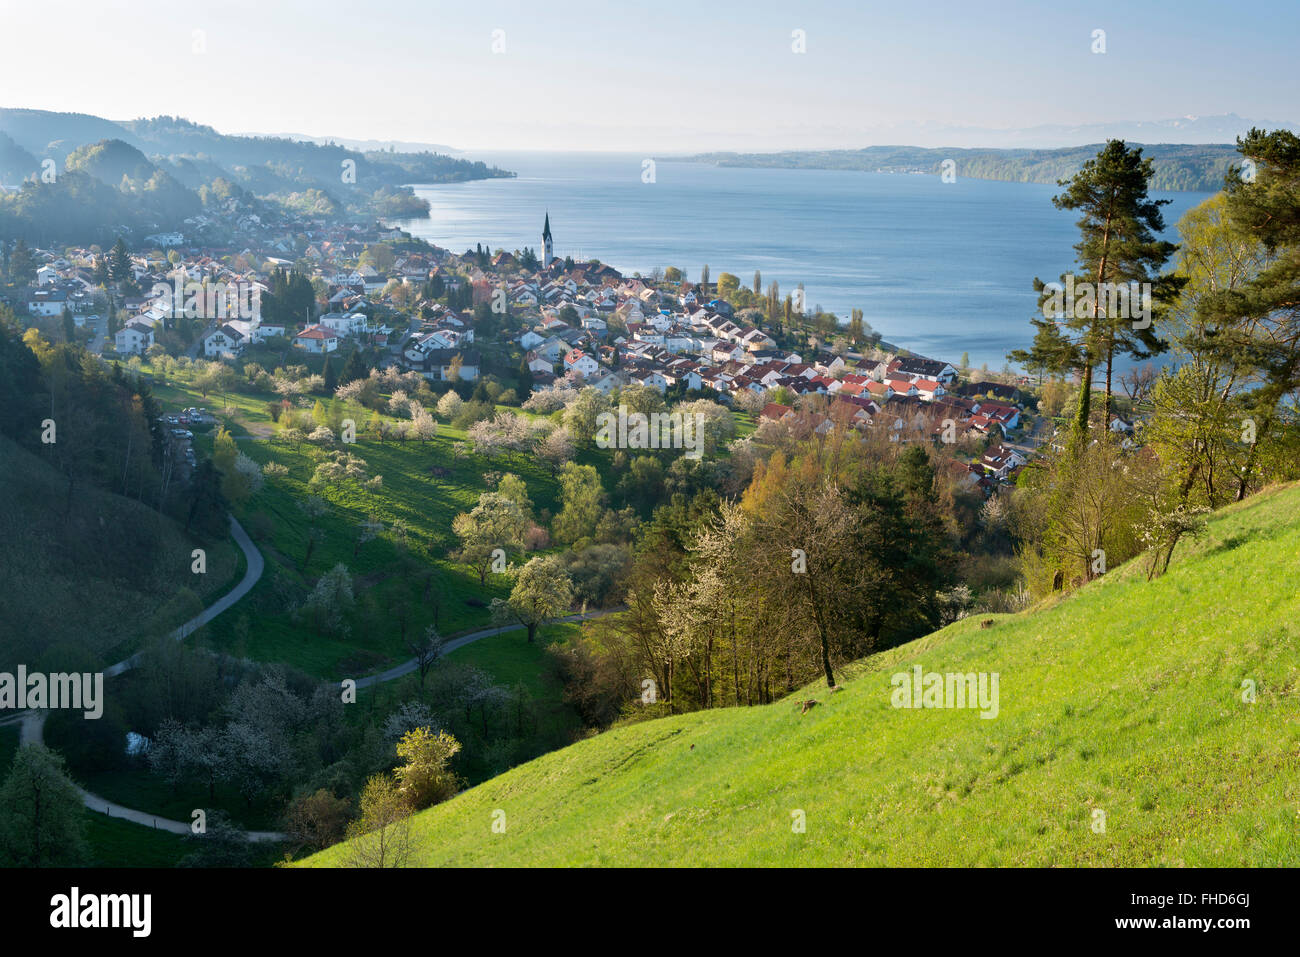 Germany, Sipplingen, View over town and Lake Constance Stock Photo